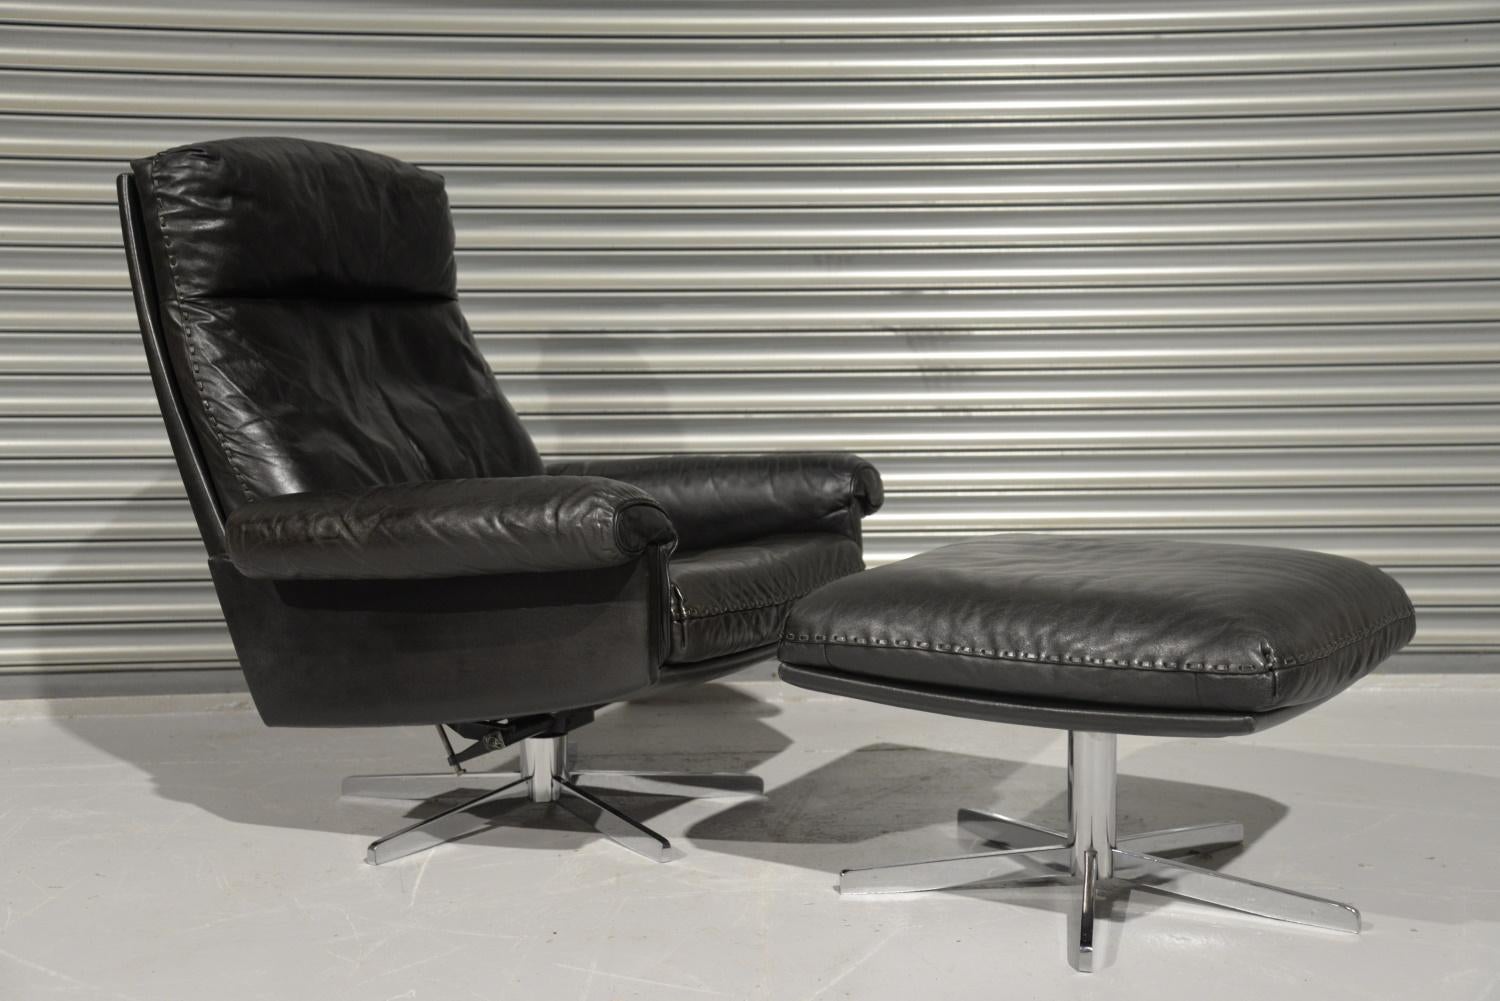 Discounted airfreight for our US and International customers (from 2 weeks door to door)

We are delighted to bring to you a highly desirable and rarely available vintage 1970s De Sede DS 31 high back swivel recling leather armchair with ottoman.